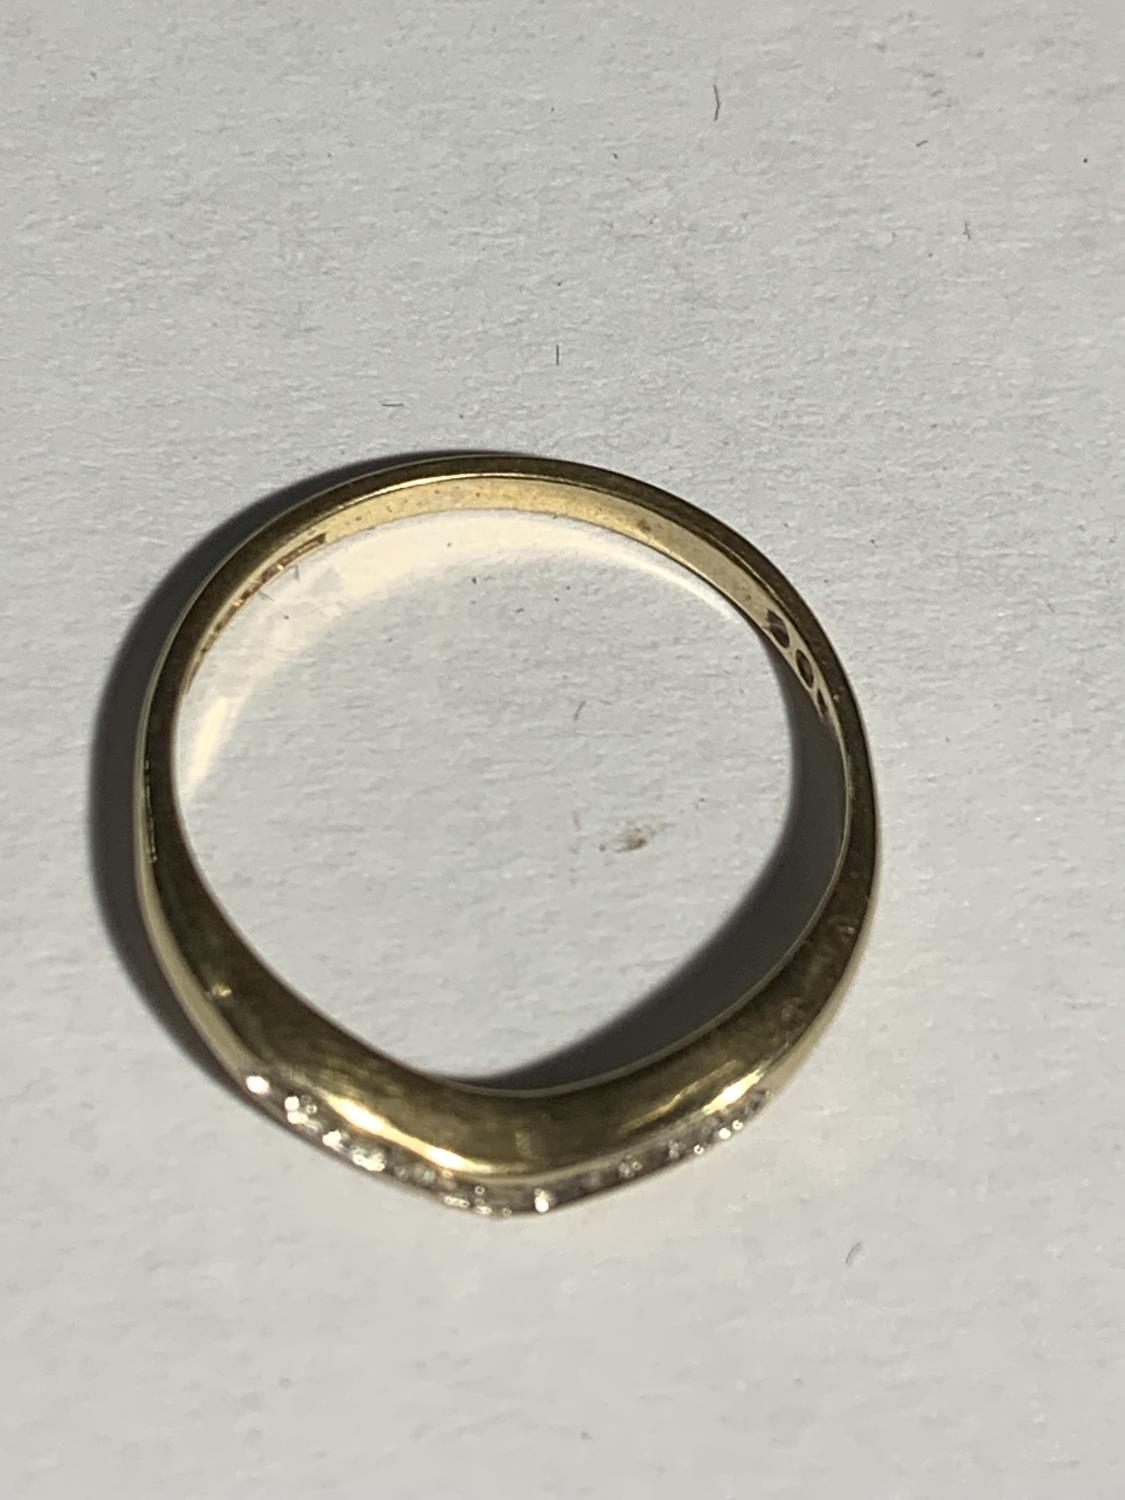 A 9 CARAT GOLD RING IN A WISHBONE DESIGN WITH CLEAR STONES POSSIBLY DIAMONDS SIZE N/O GROSS WEIGHT - Image 2 of 3